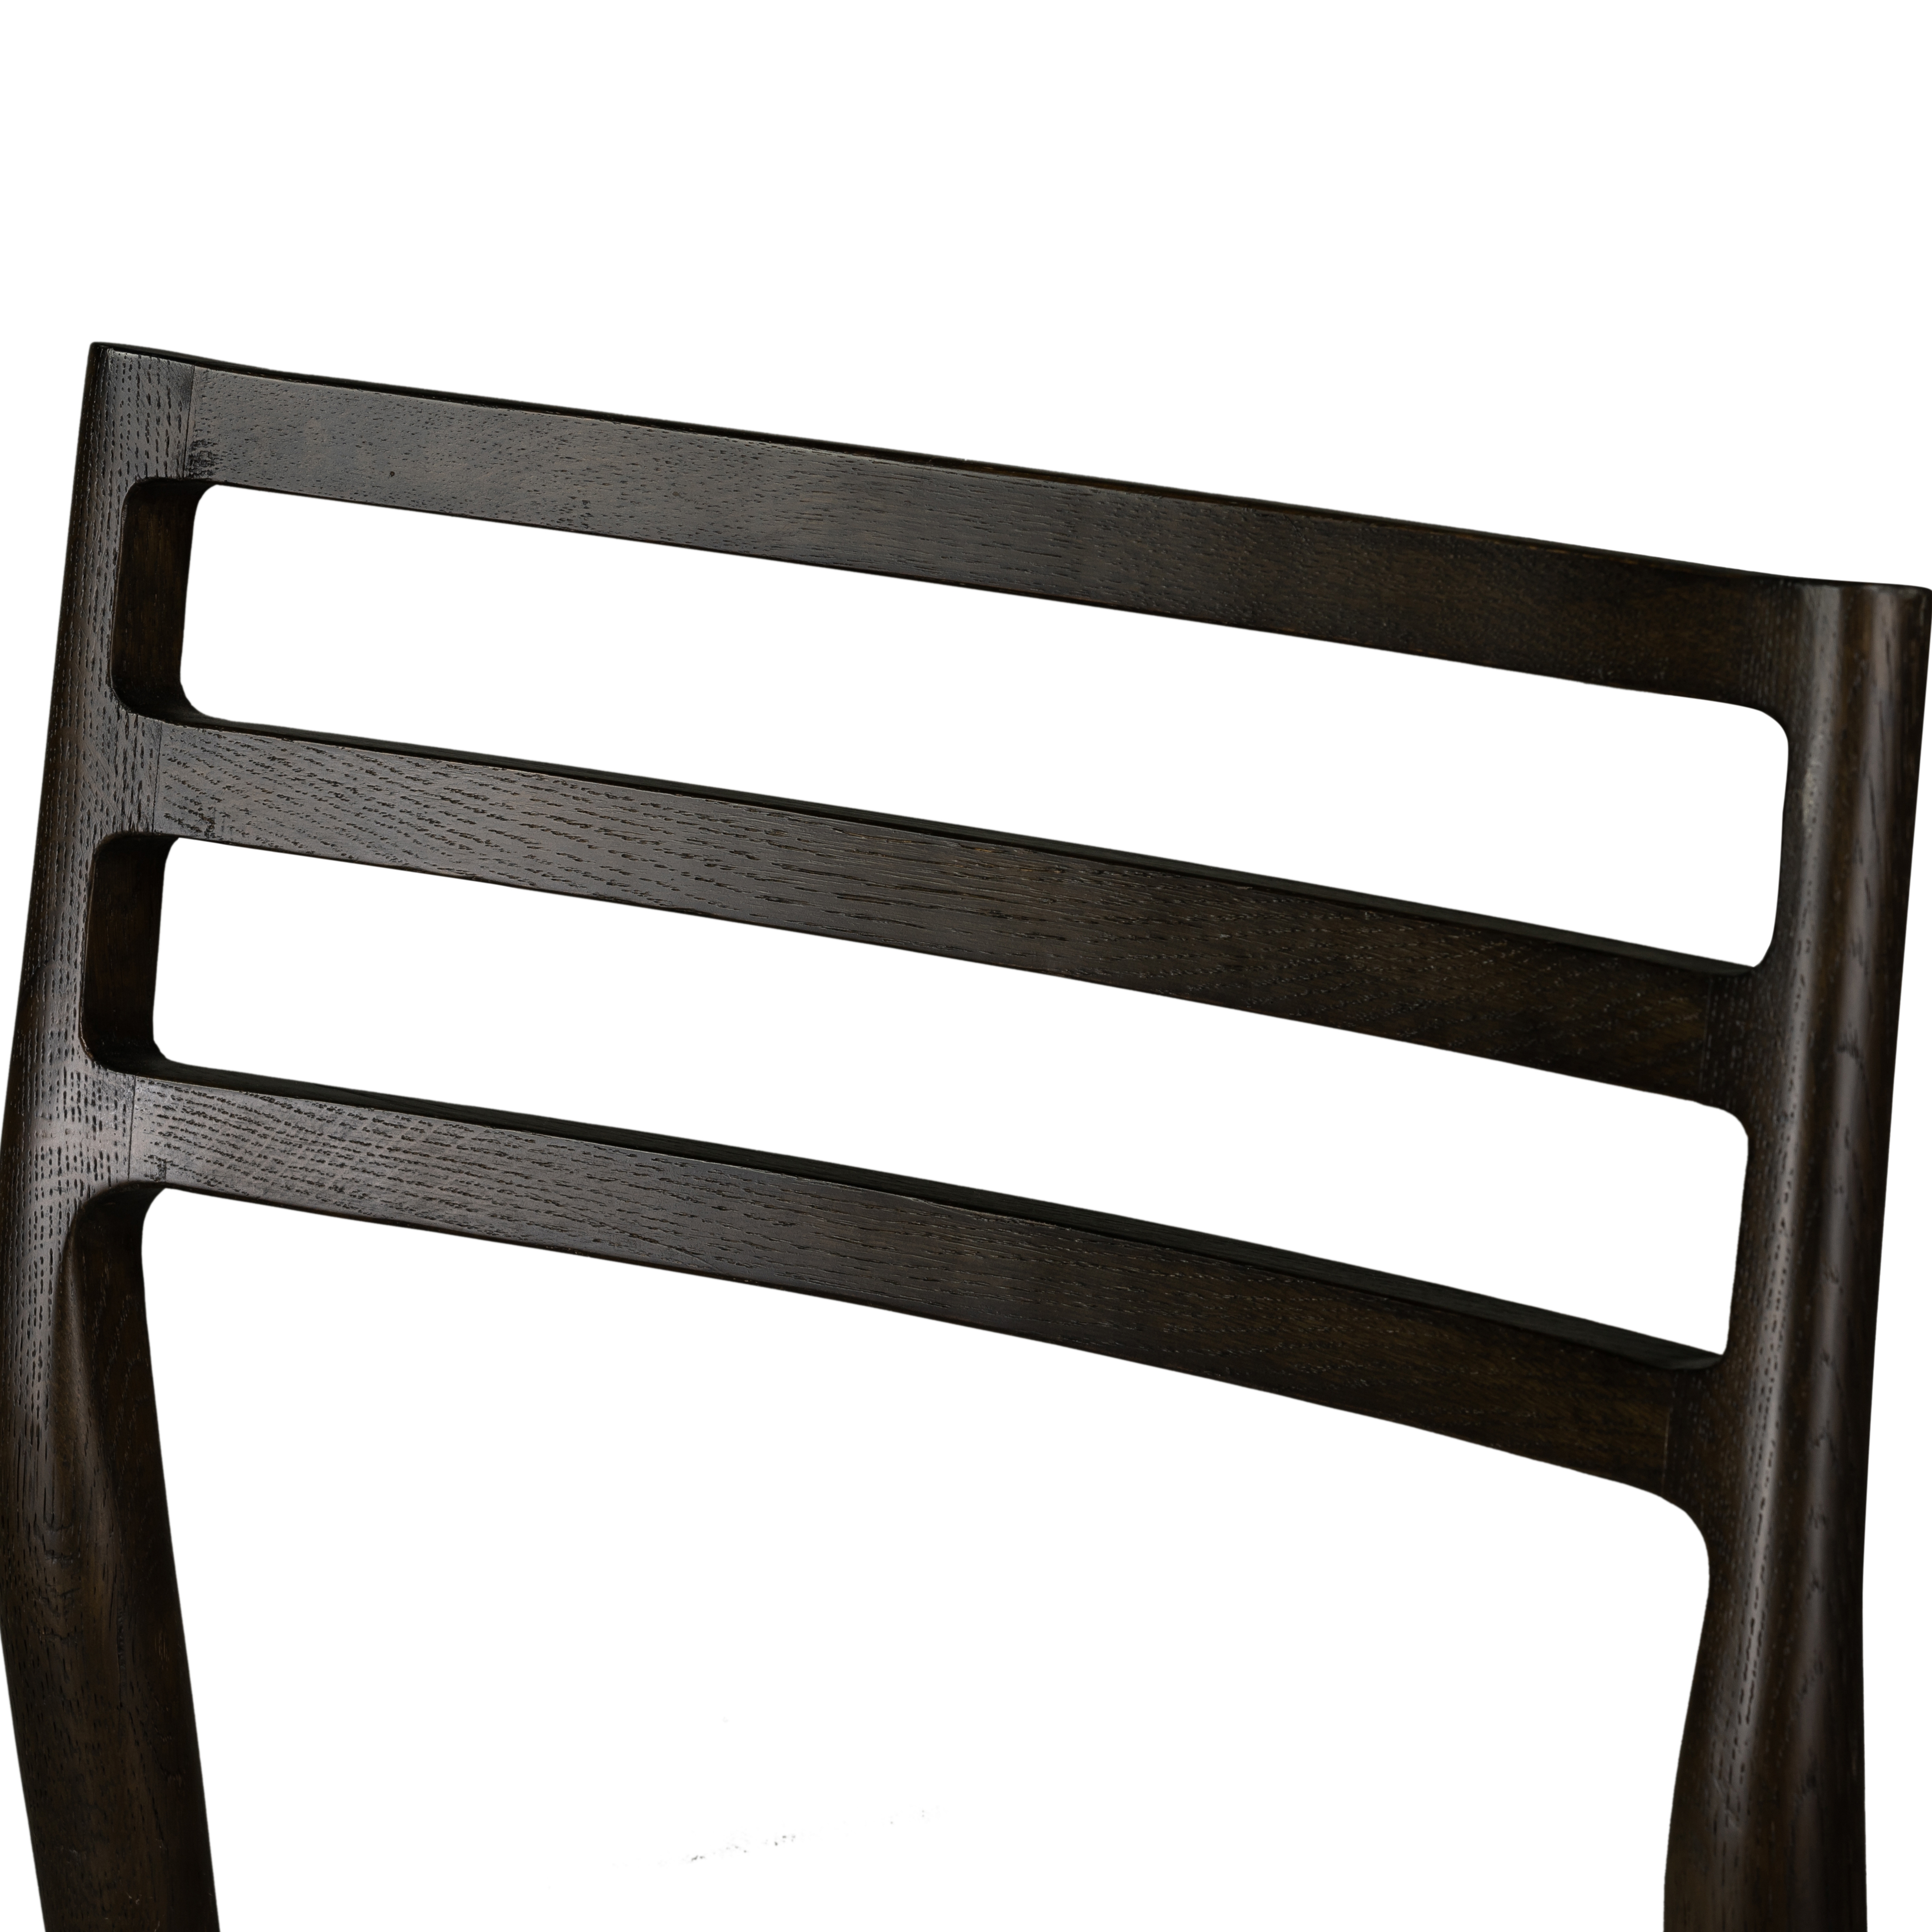 Glenmore Dining Chair-Essence Natural - Image 2